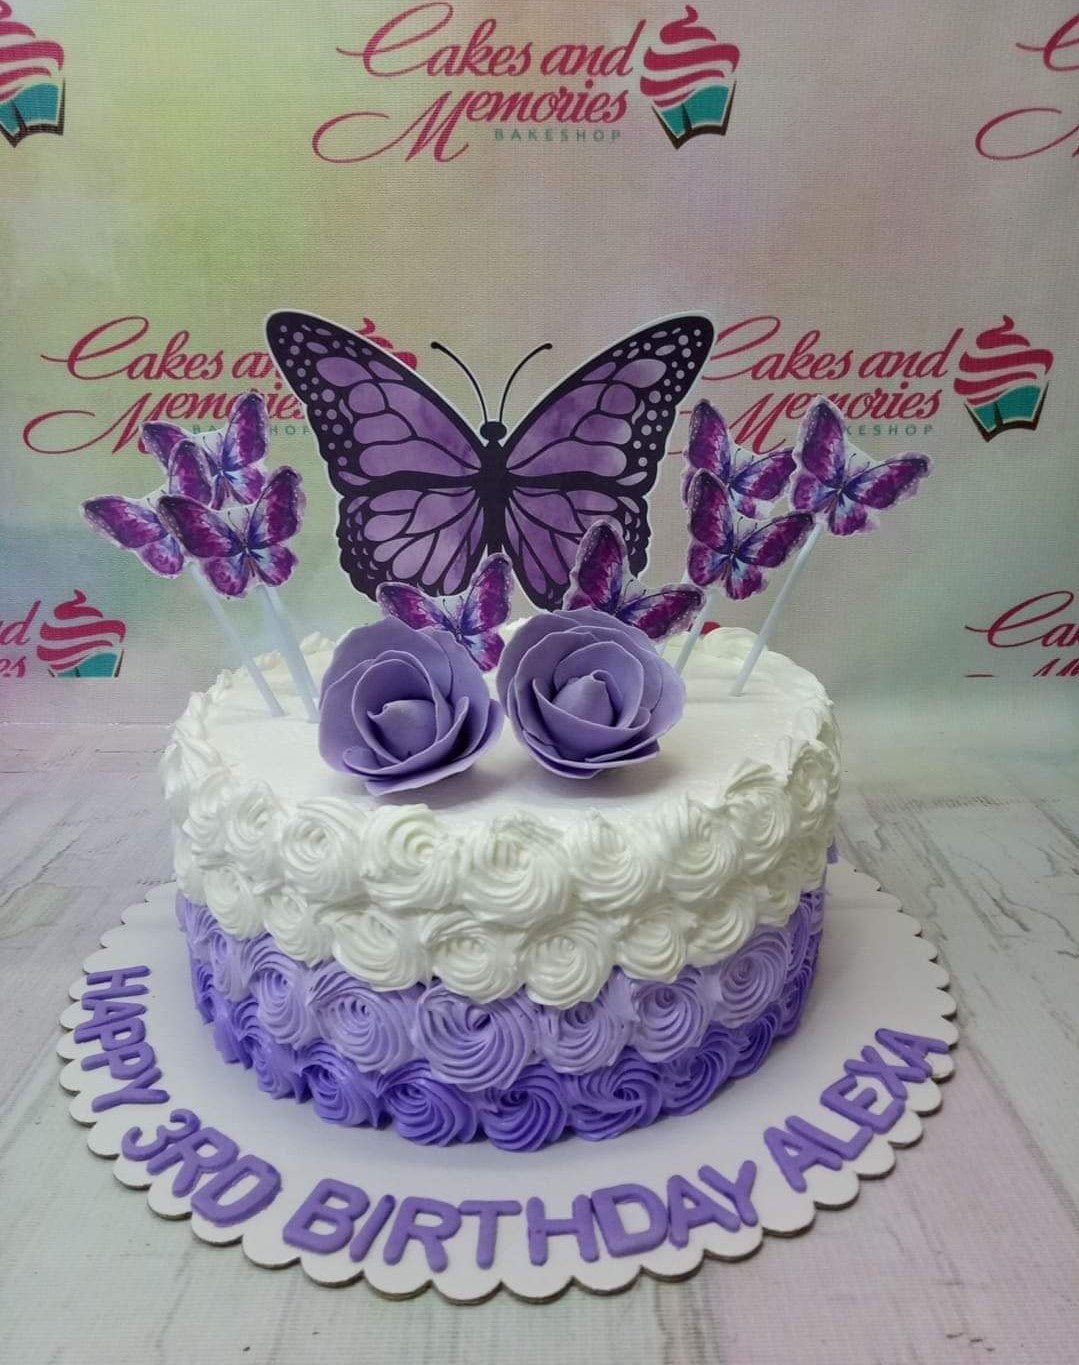 Innovative Cake Gifts | Birthday Cake Gift Delivery | Send A Cake